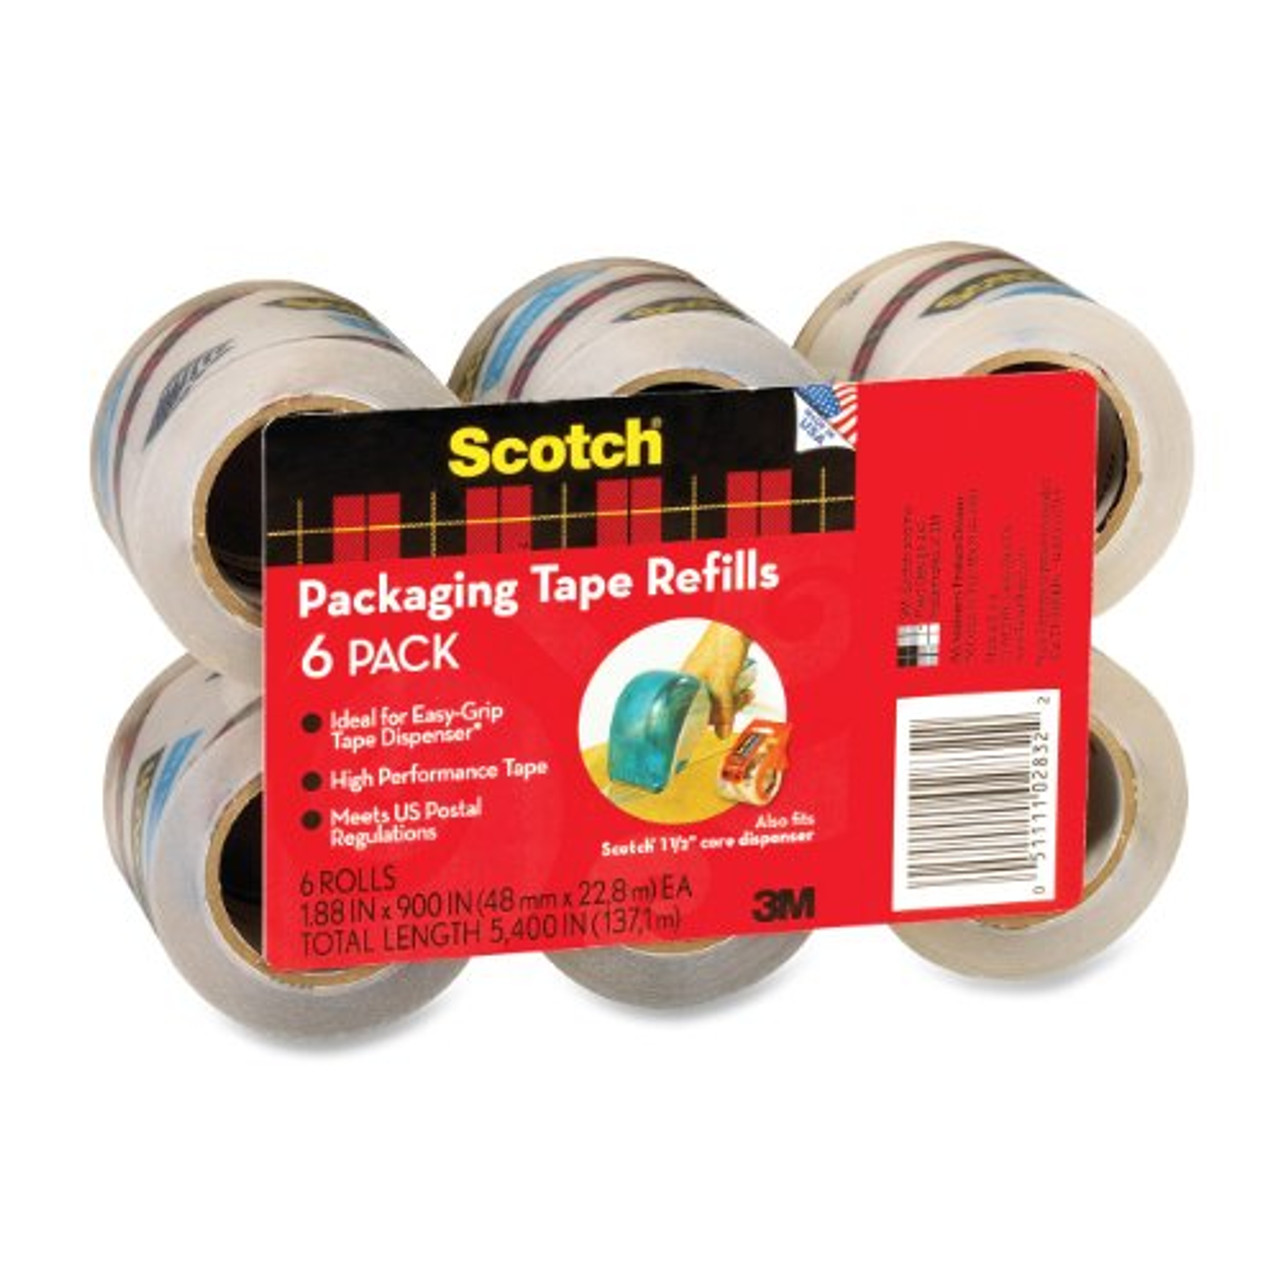 Scotch Packaging Tape Dispenser with Two Rolls of Tape, 1.88 x